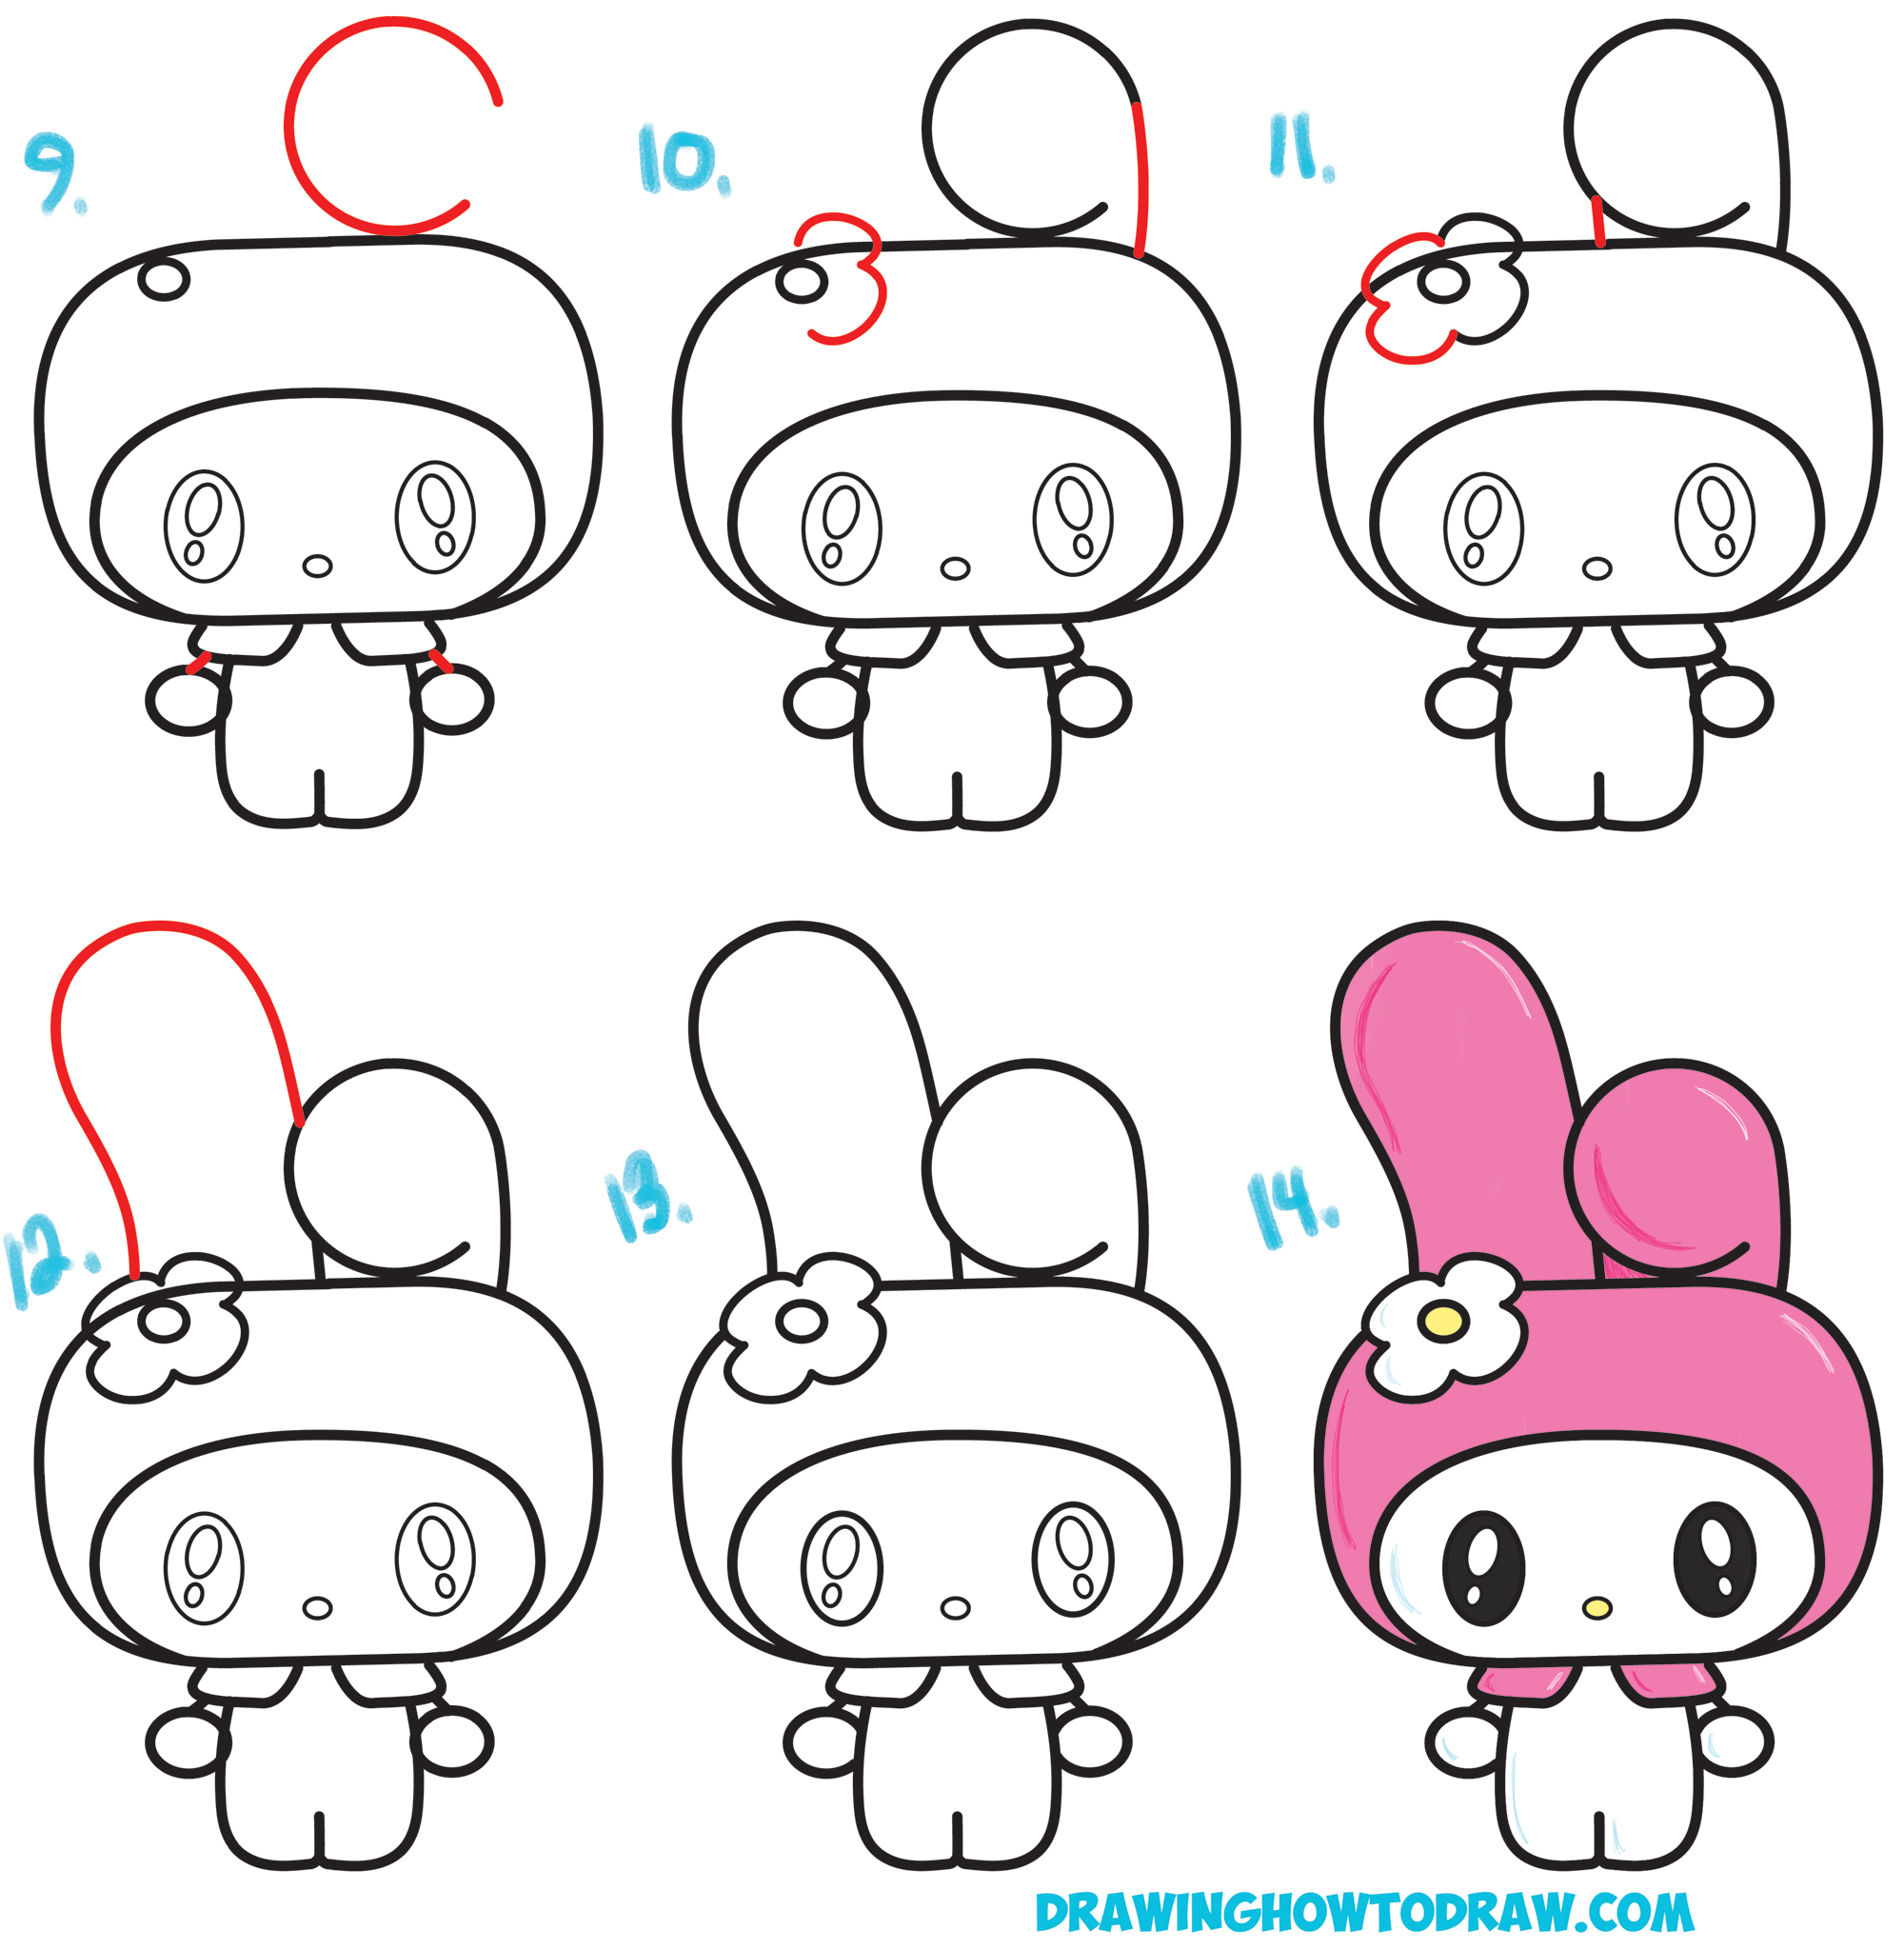 How to Draw a Cute Manga / Anime / Chibi Girl with her Kitty Cat - Easy  Step by Step Drawing Lesson - How to Draw Step by Step Drawing Tutorials